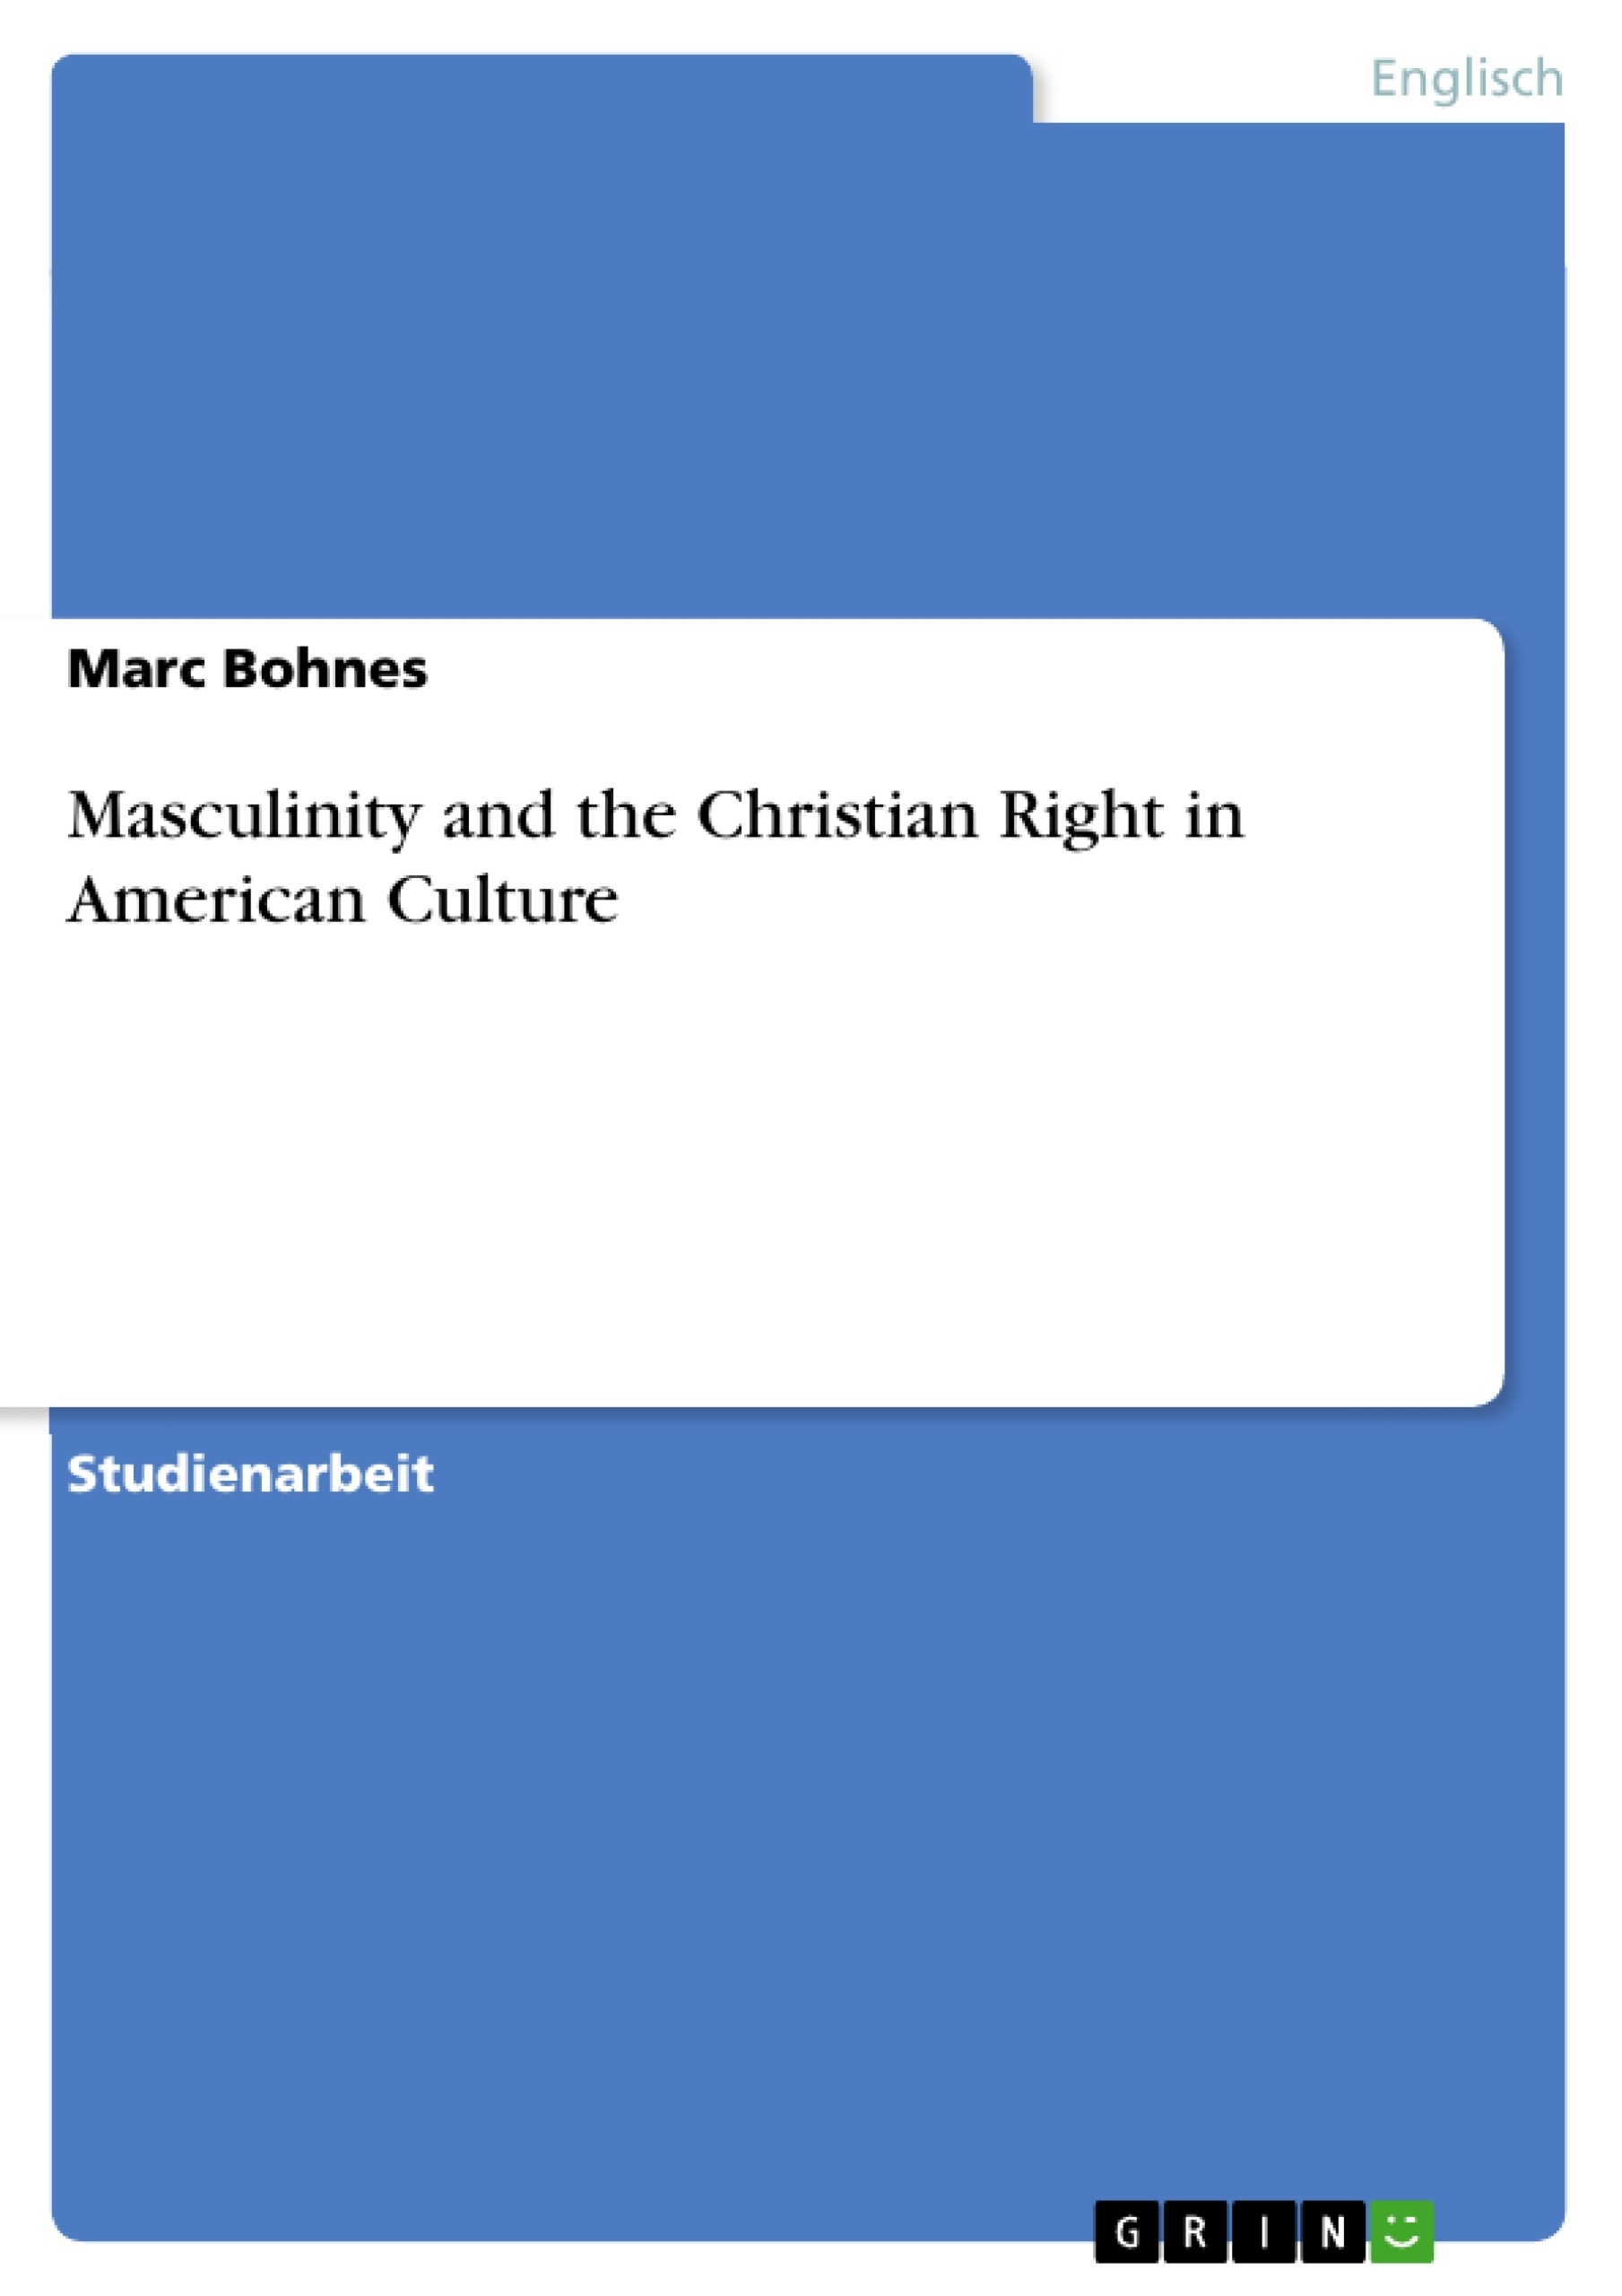 Titel: Masculinity and the Christian Right in American Culture